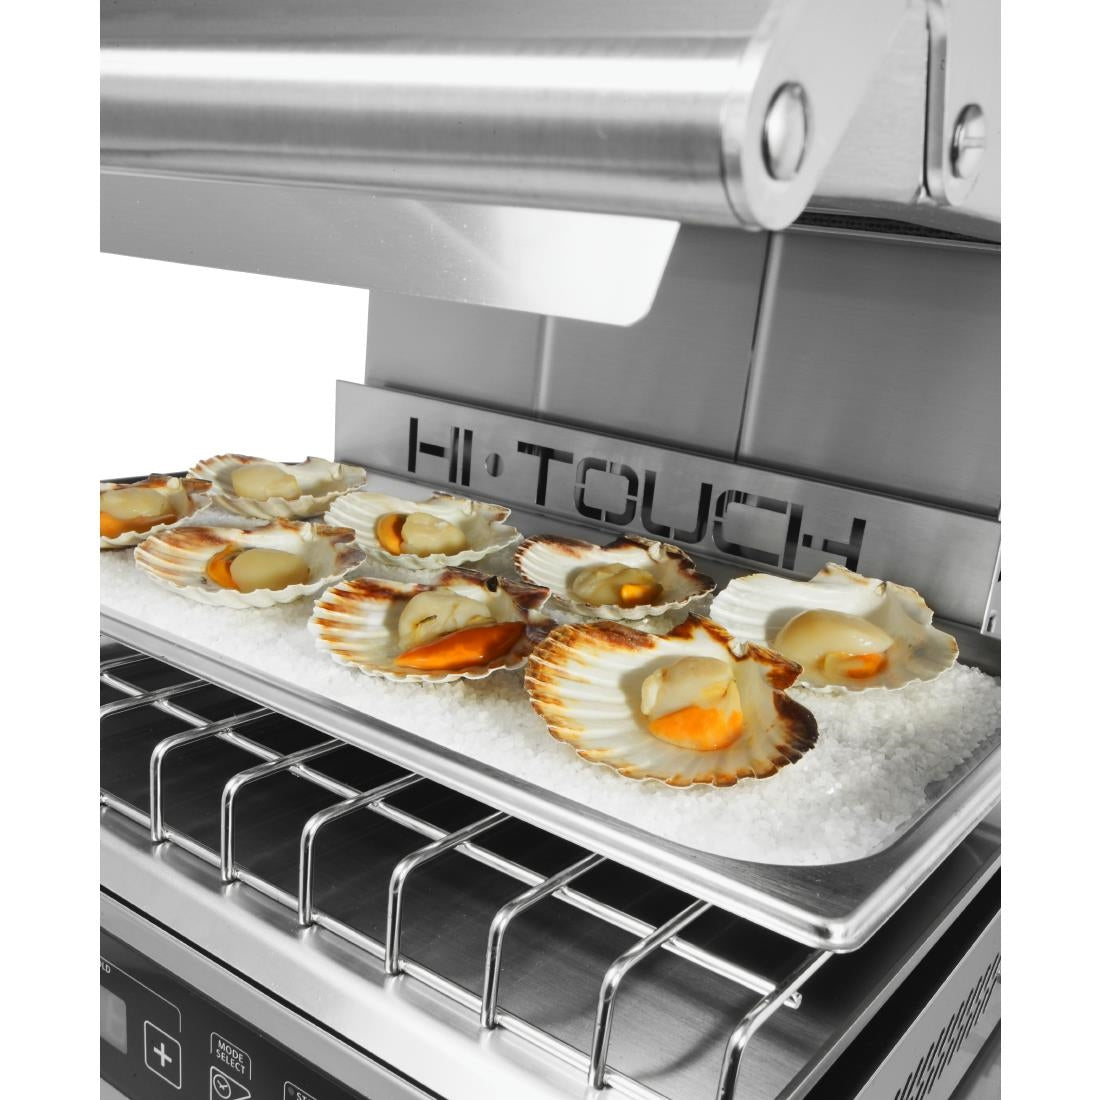 FW878 Giorek Hi Touch Rise and Fall Electric Salamander Grill ST30 3 Phase JD Catering Equipment Solutions Ltd